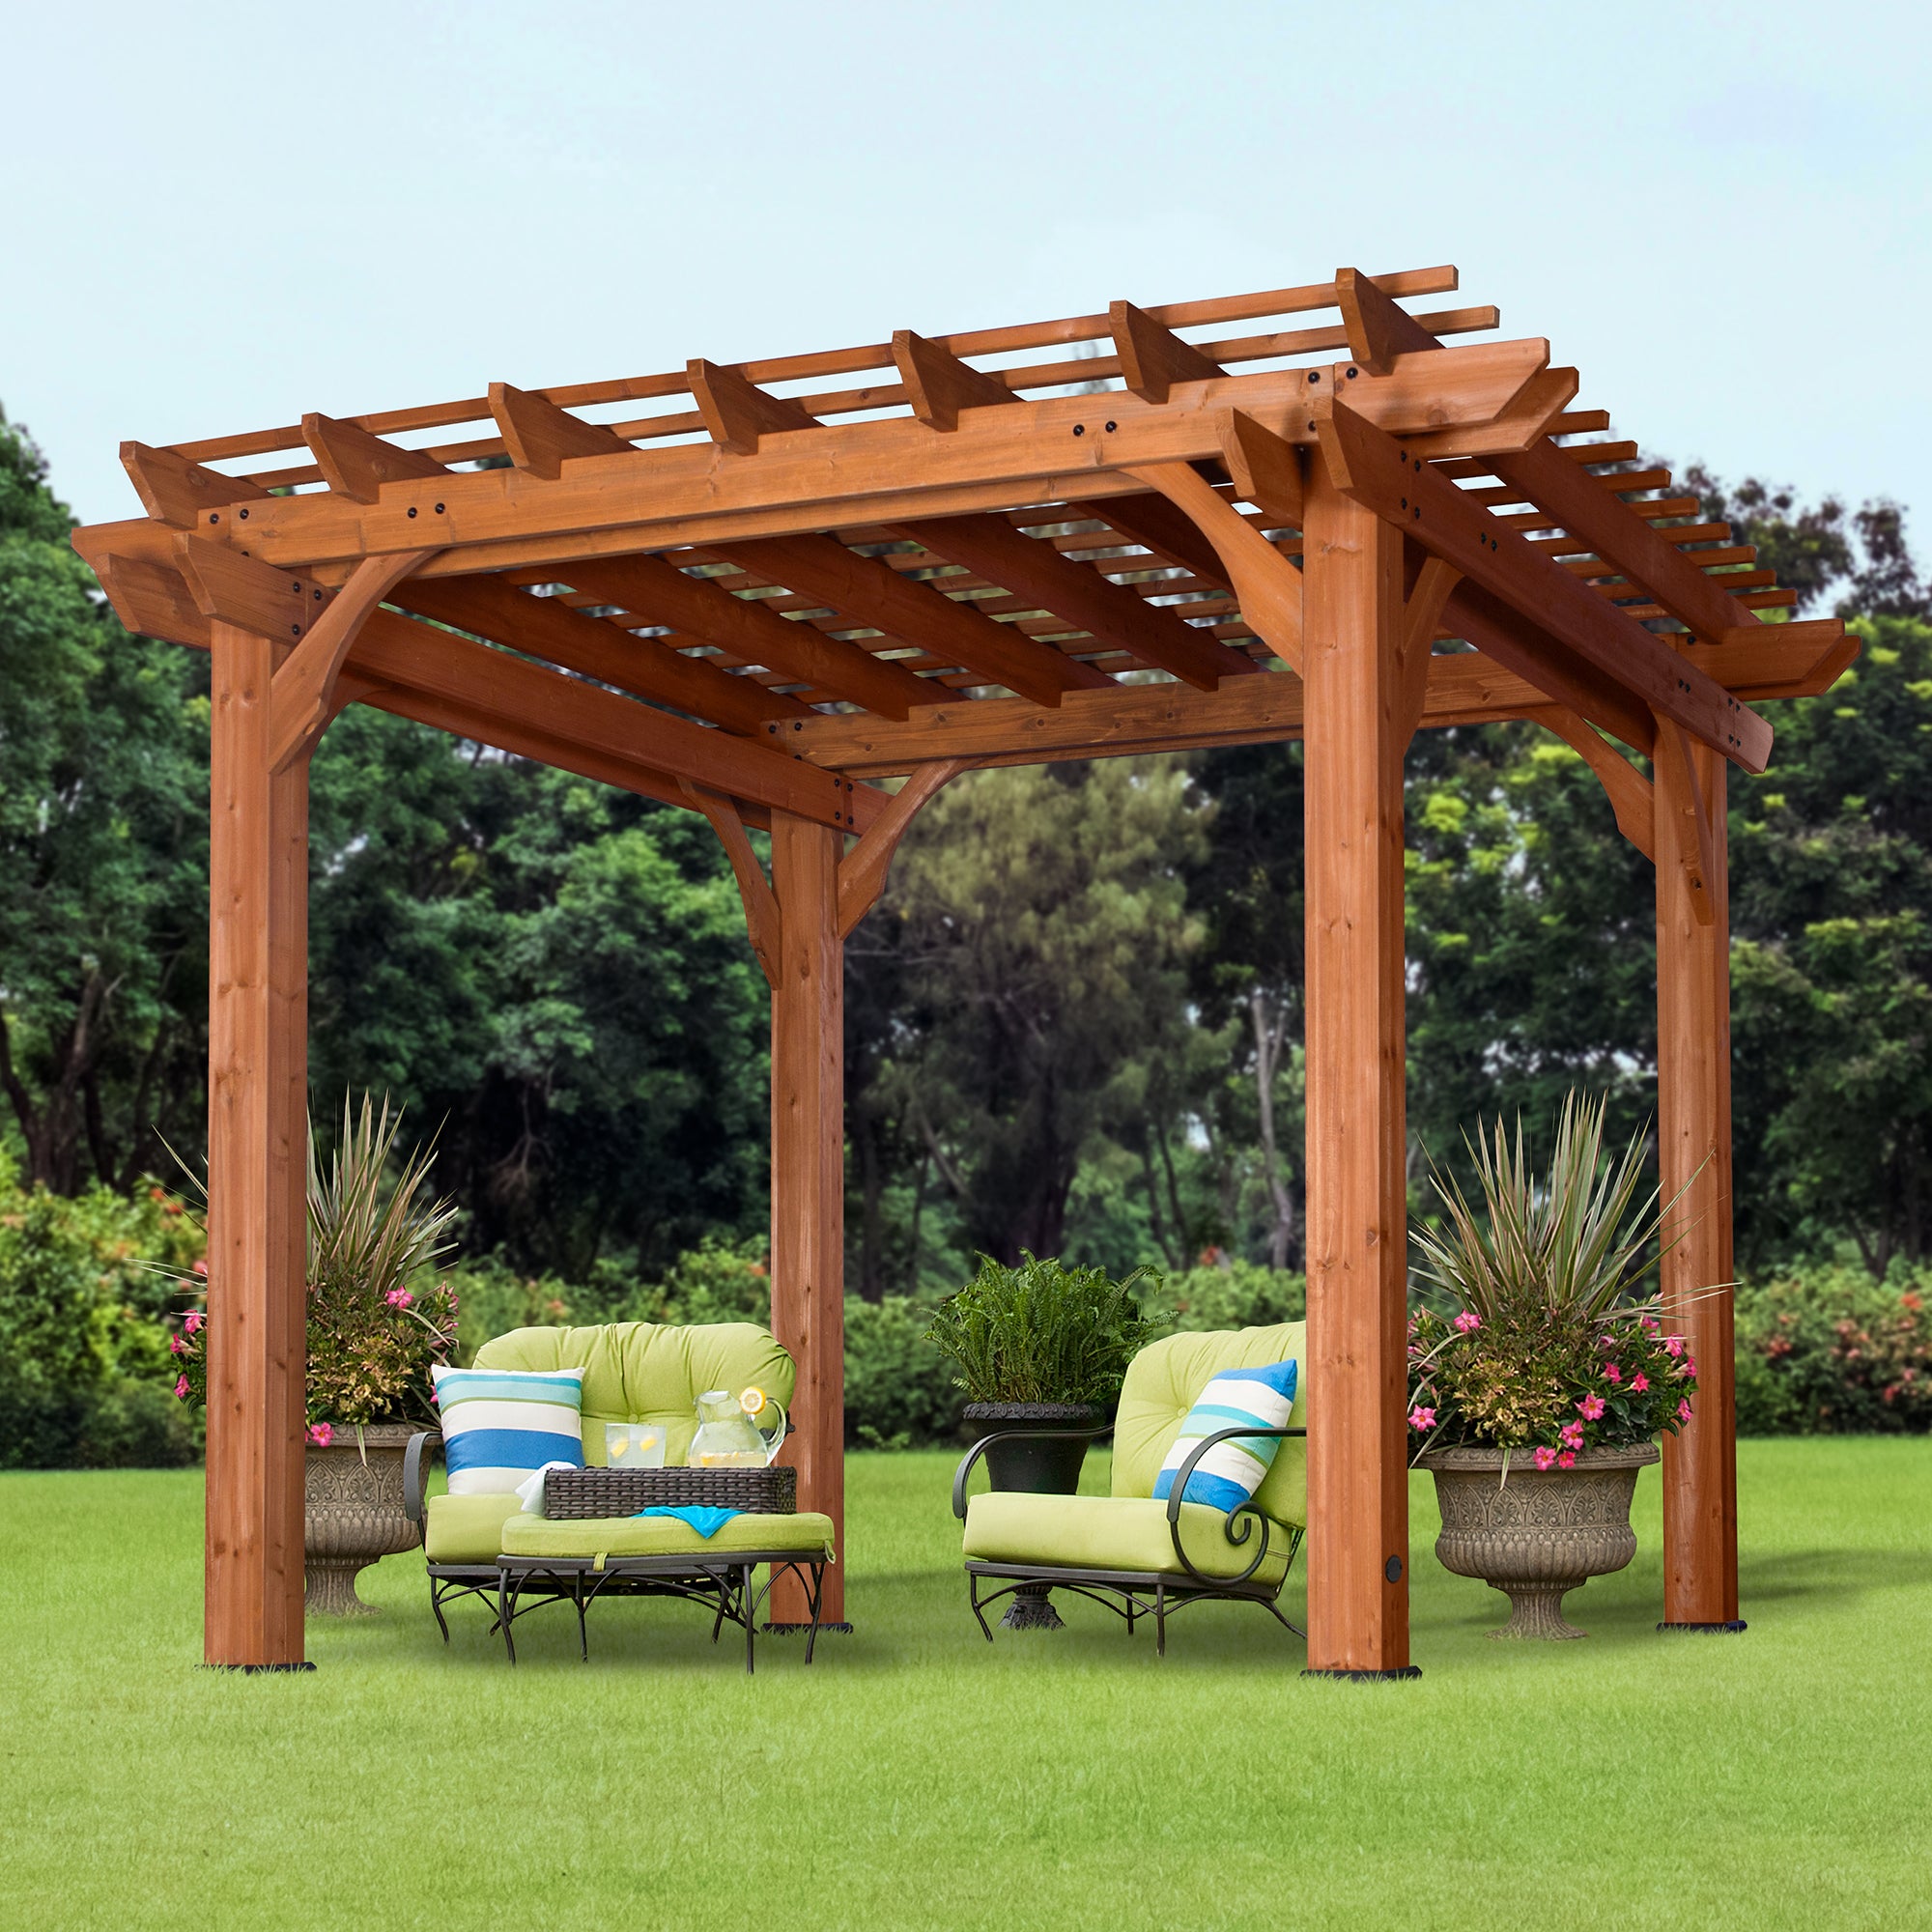 10' x 10' Wooden Pergola For Patios | Backyard Discovery